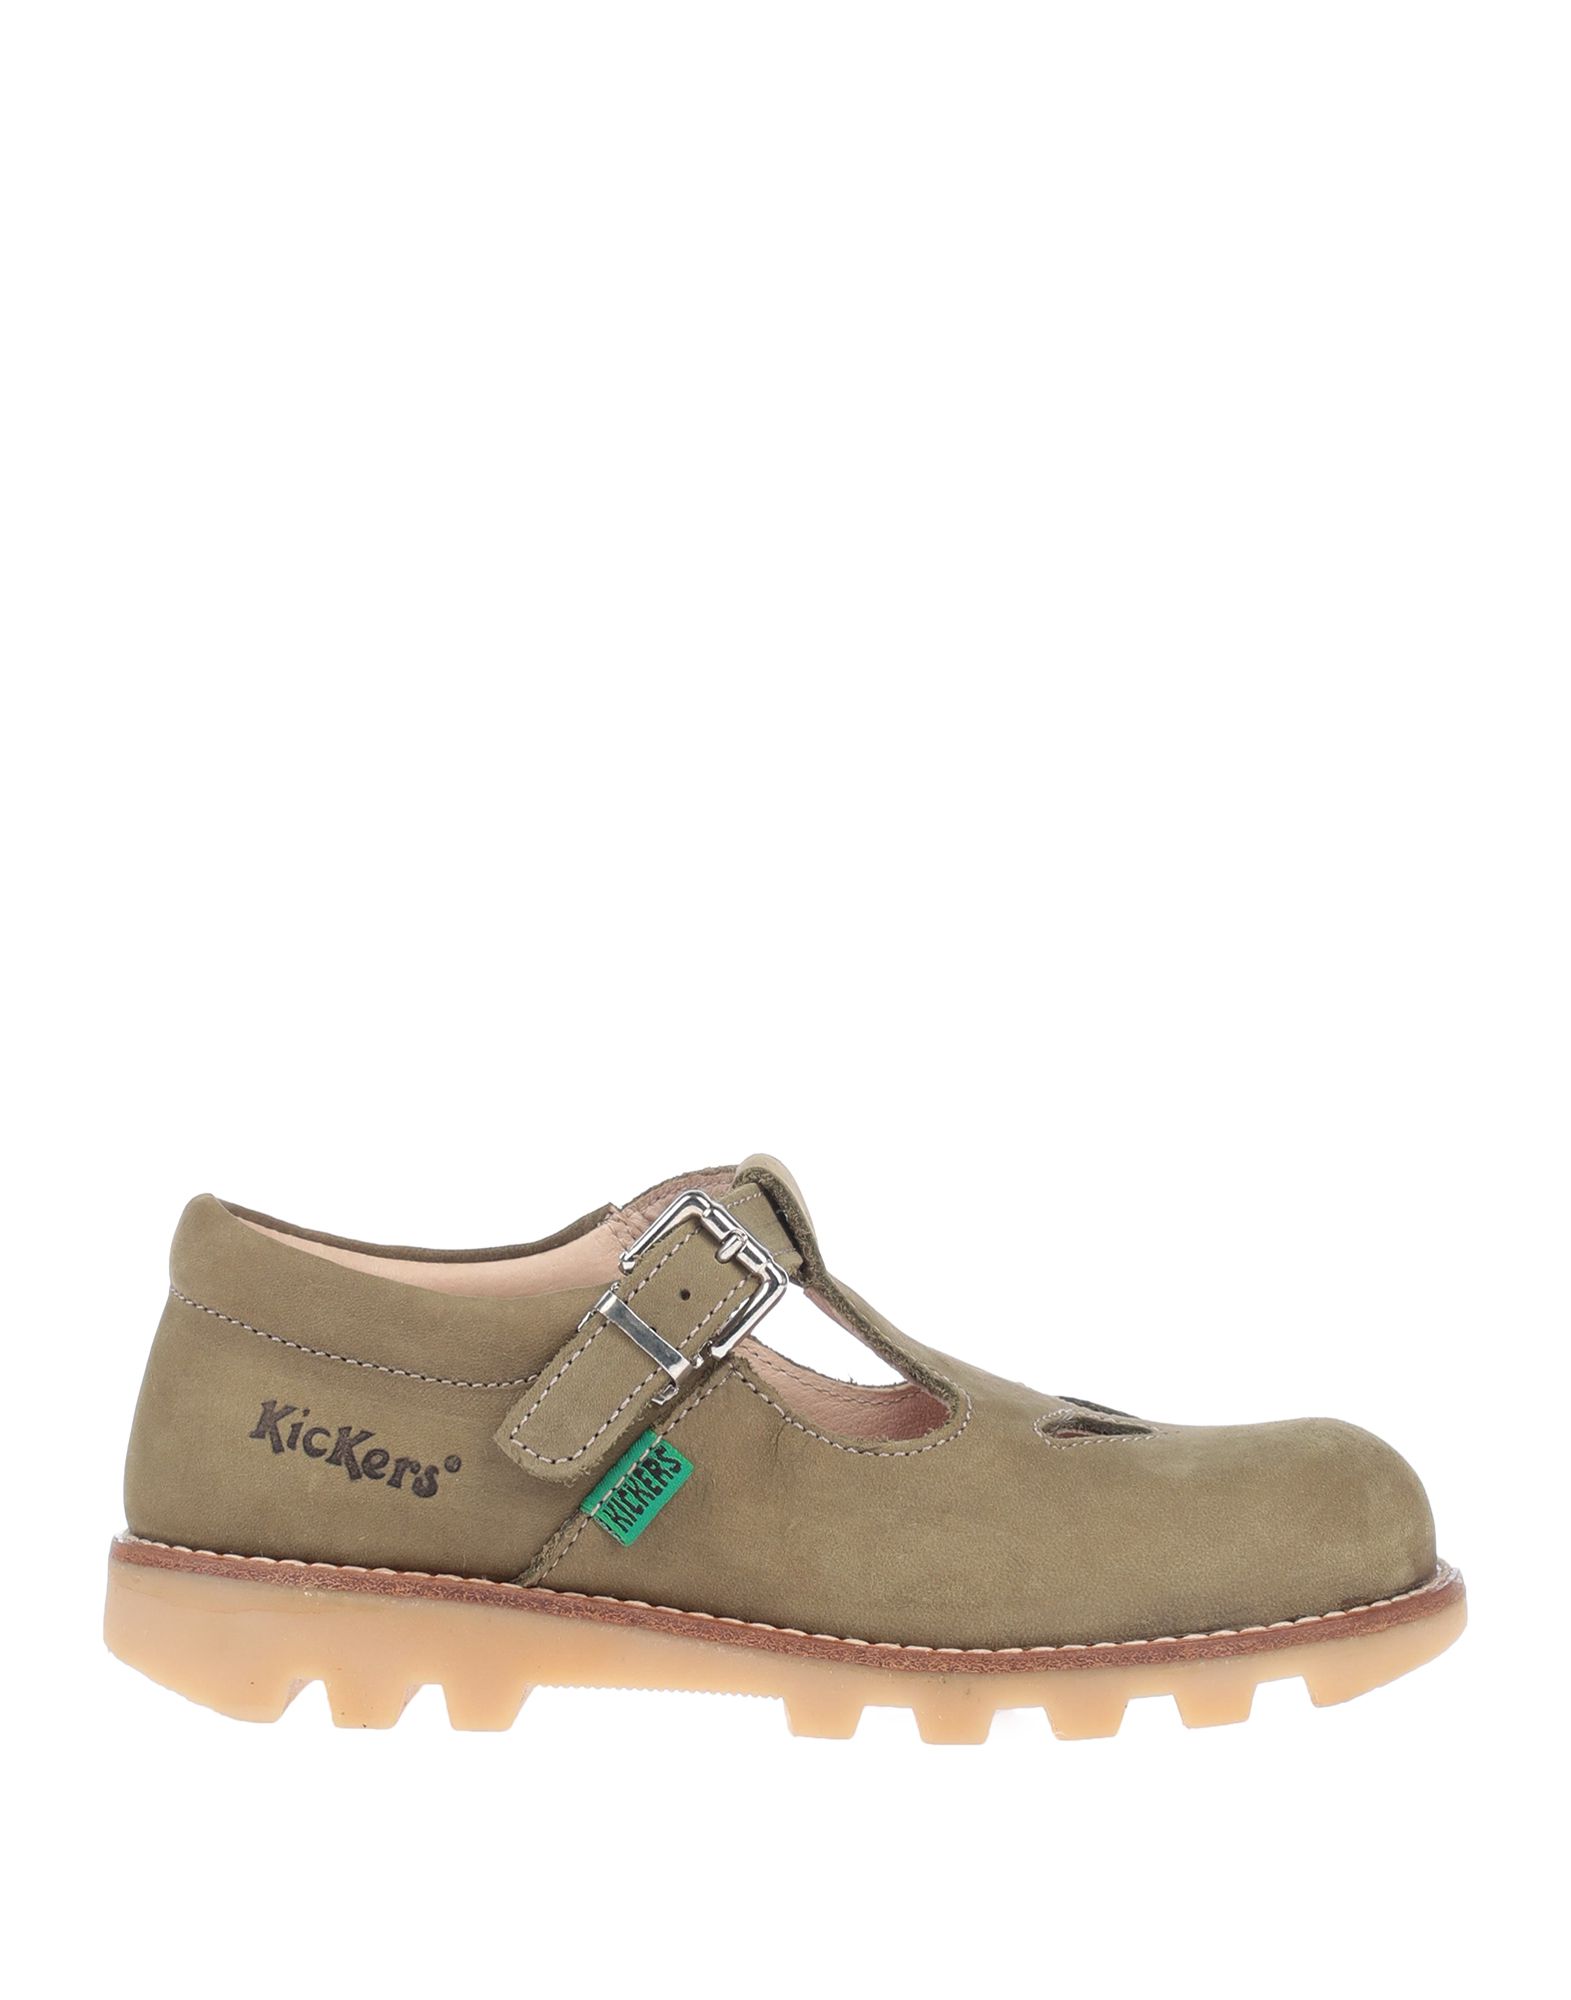 Kids' Sandals In Military Green | ModeSens